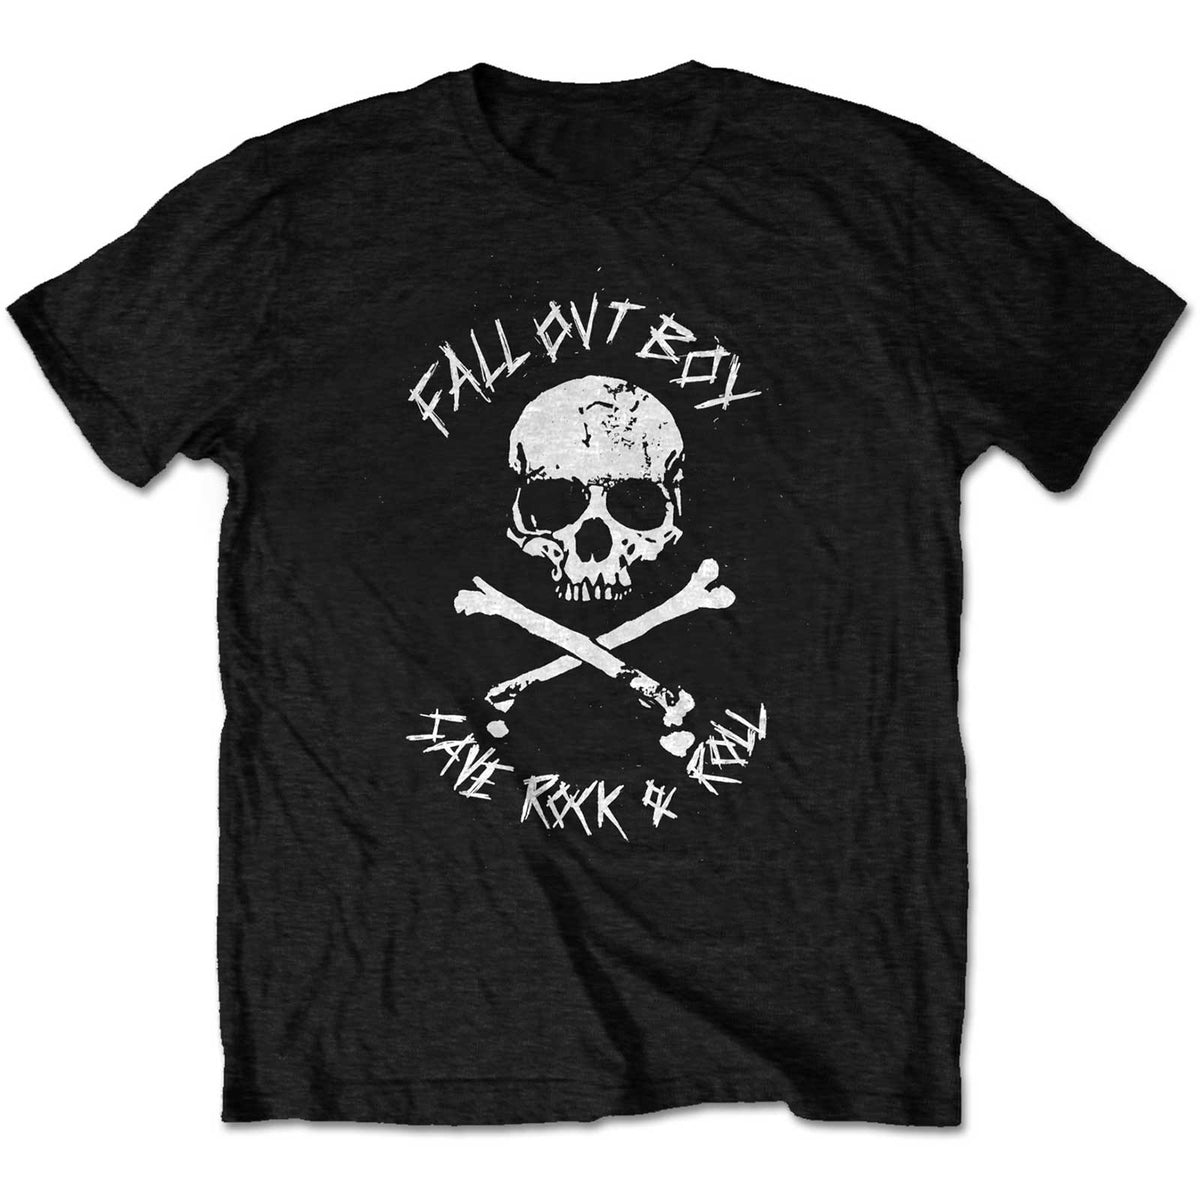 Fall Out Boy T-Shirt | Save Rock And Roll